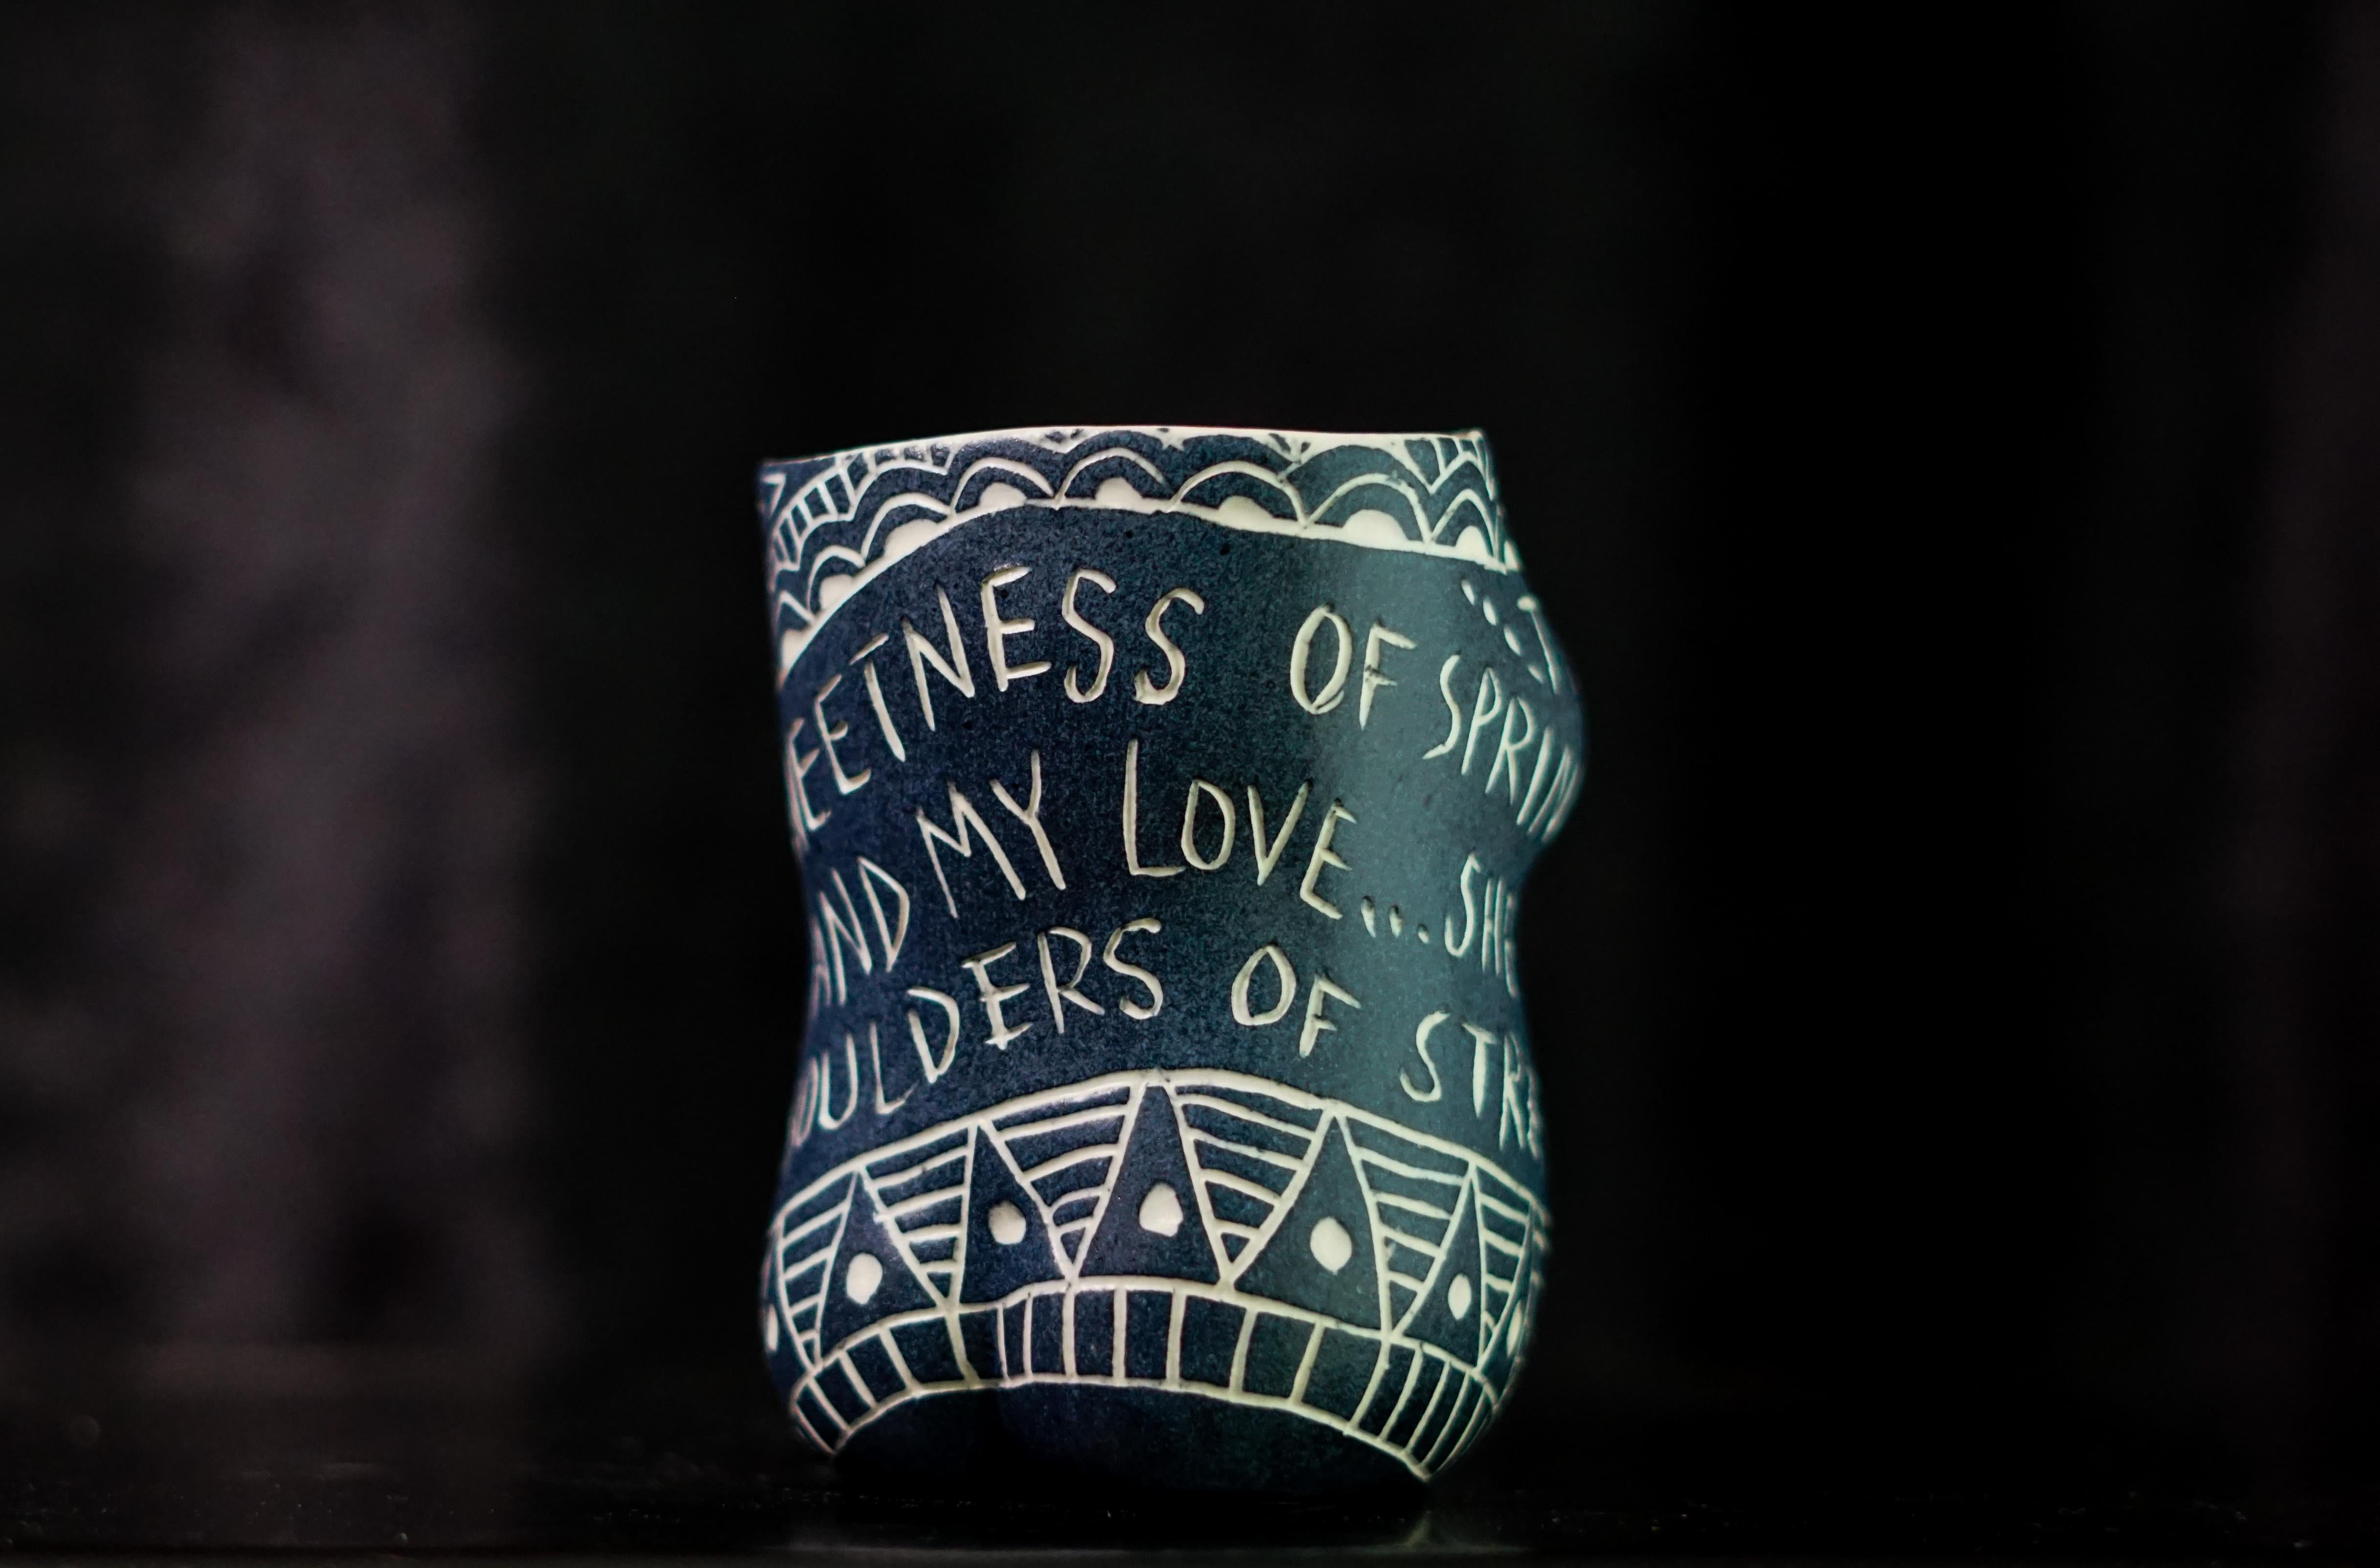 “The Rush of Love..” 2019
From the series Fragments of Our Love Story
Porcelain cup with sgraffito detailing
4 x 3 x 3 inches.

“The rush of love...” The rush of love. The sweetness of spring.. (fickle things) And my Love... she is steadfast. She is